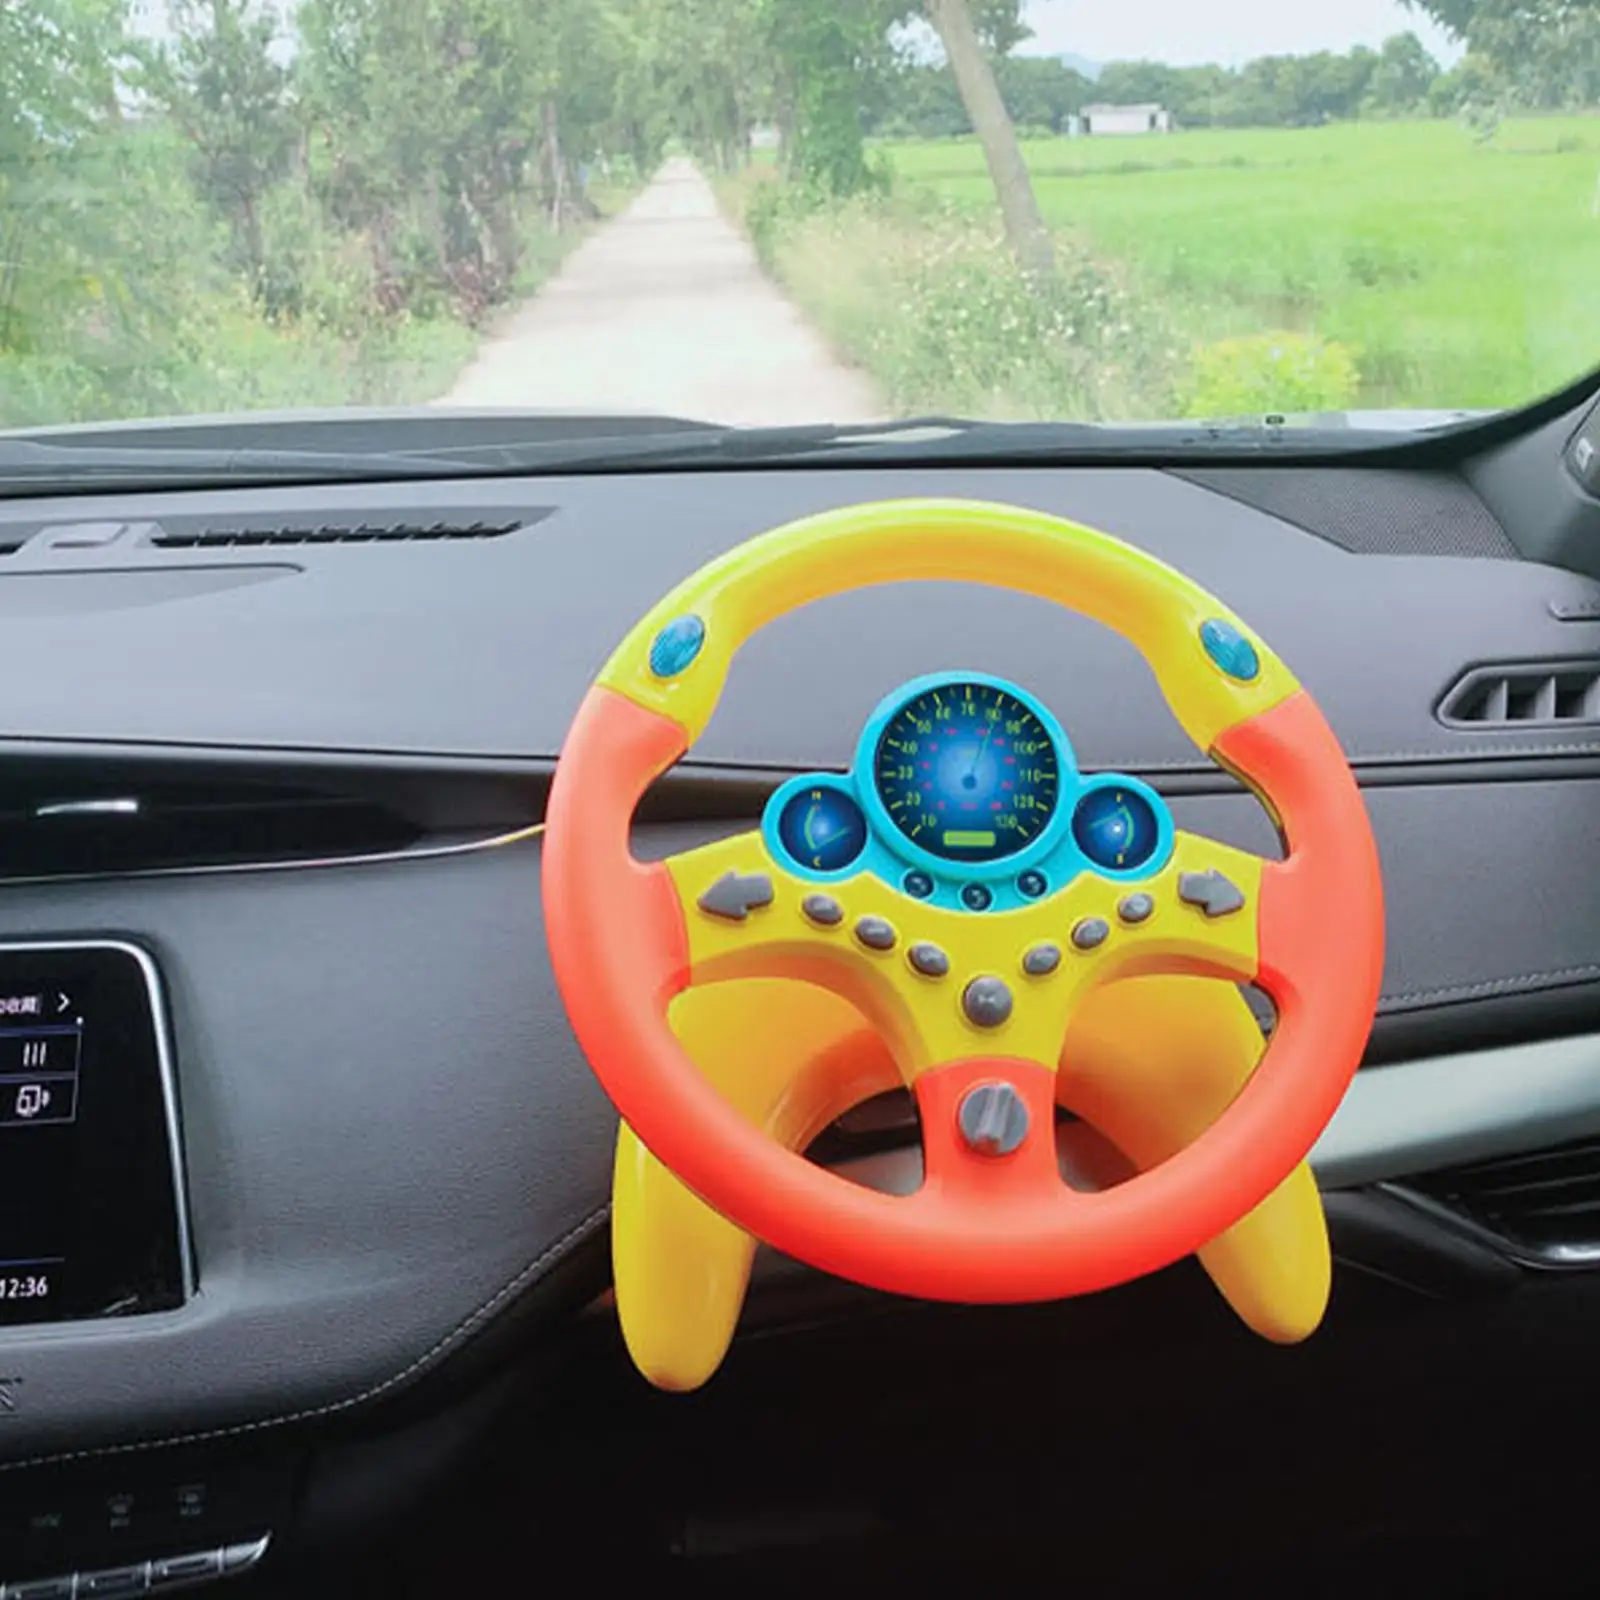 Eletric Simulation Steering Wheel Multifunctional with Music Games Sound Effects Toy Steering Wheel for Games Boys and Girls